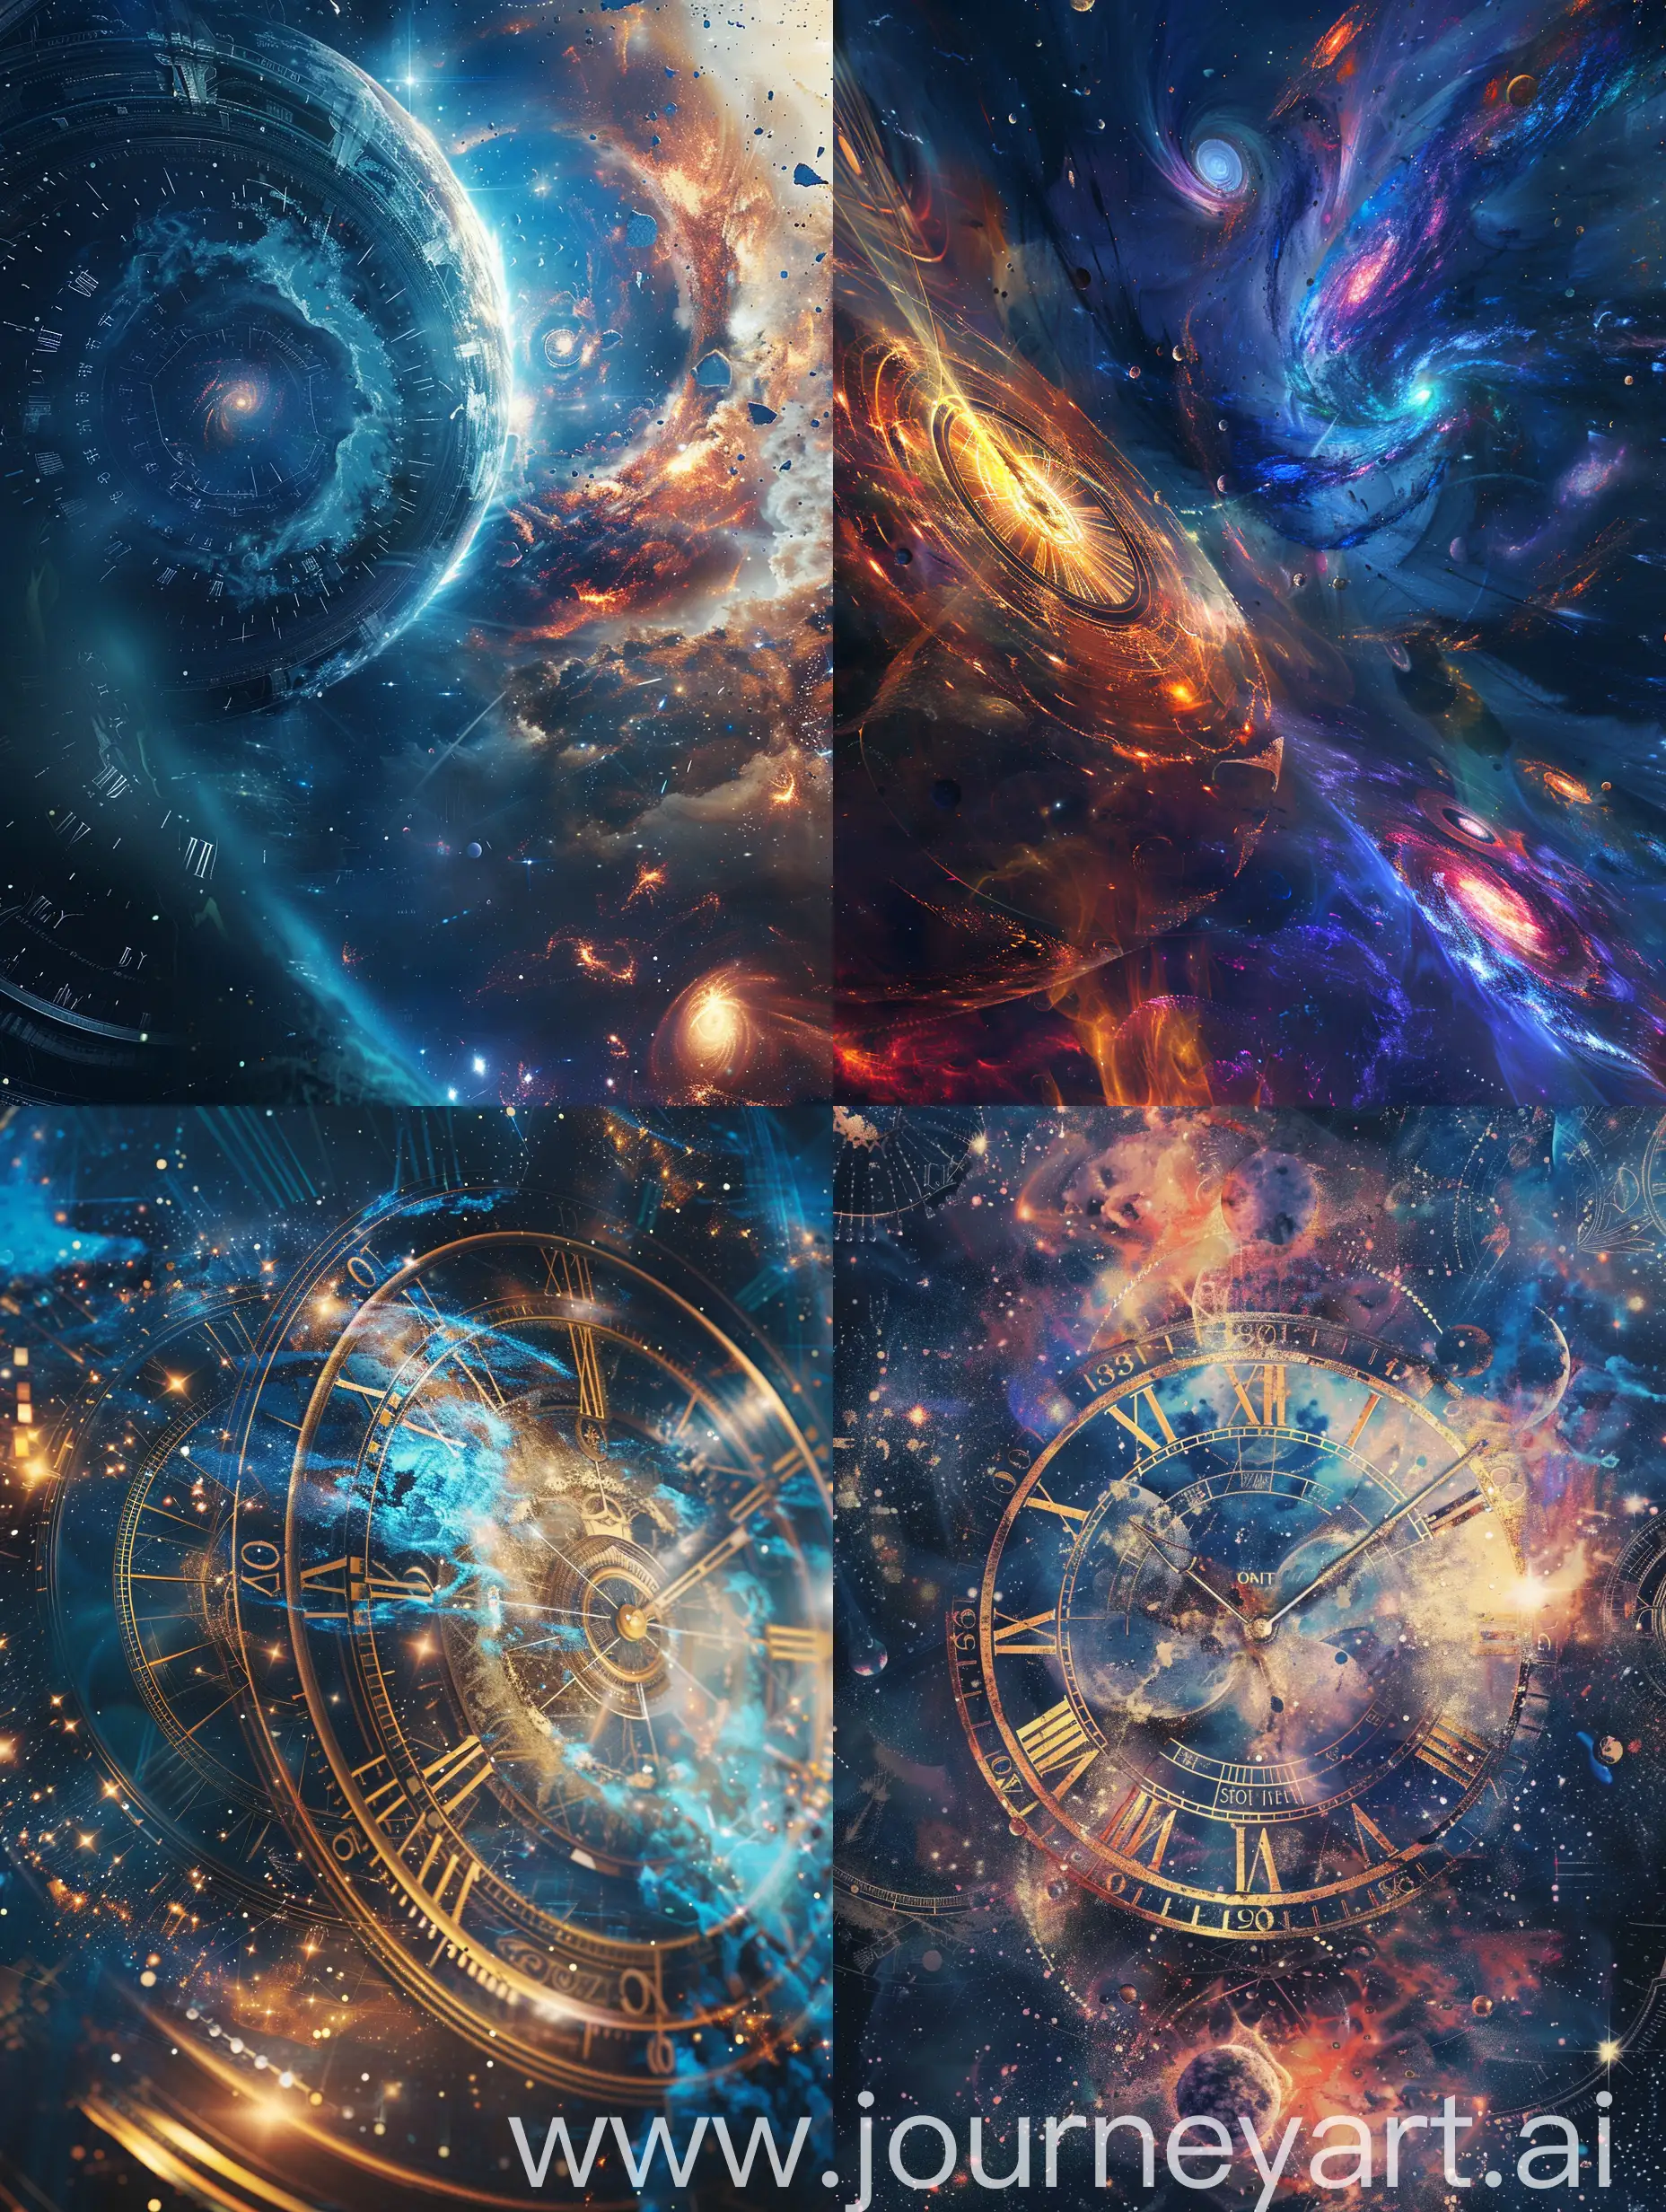 Ethereal-Time-and-Space-Exploration-Website-Header-Art